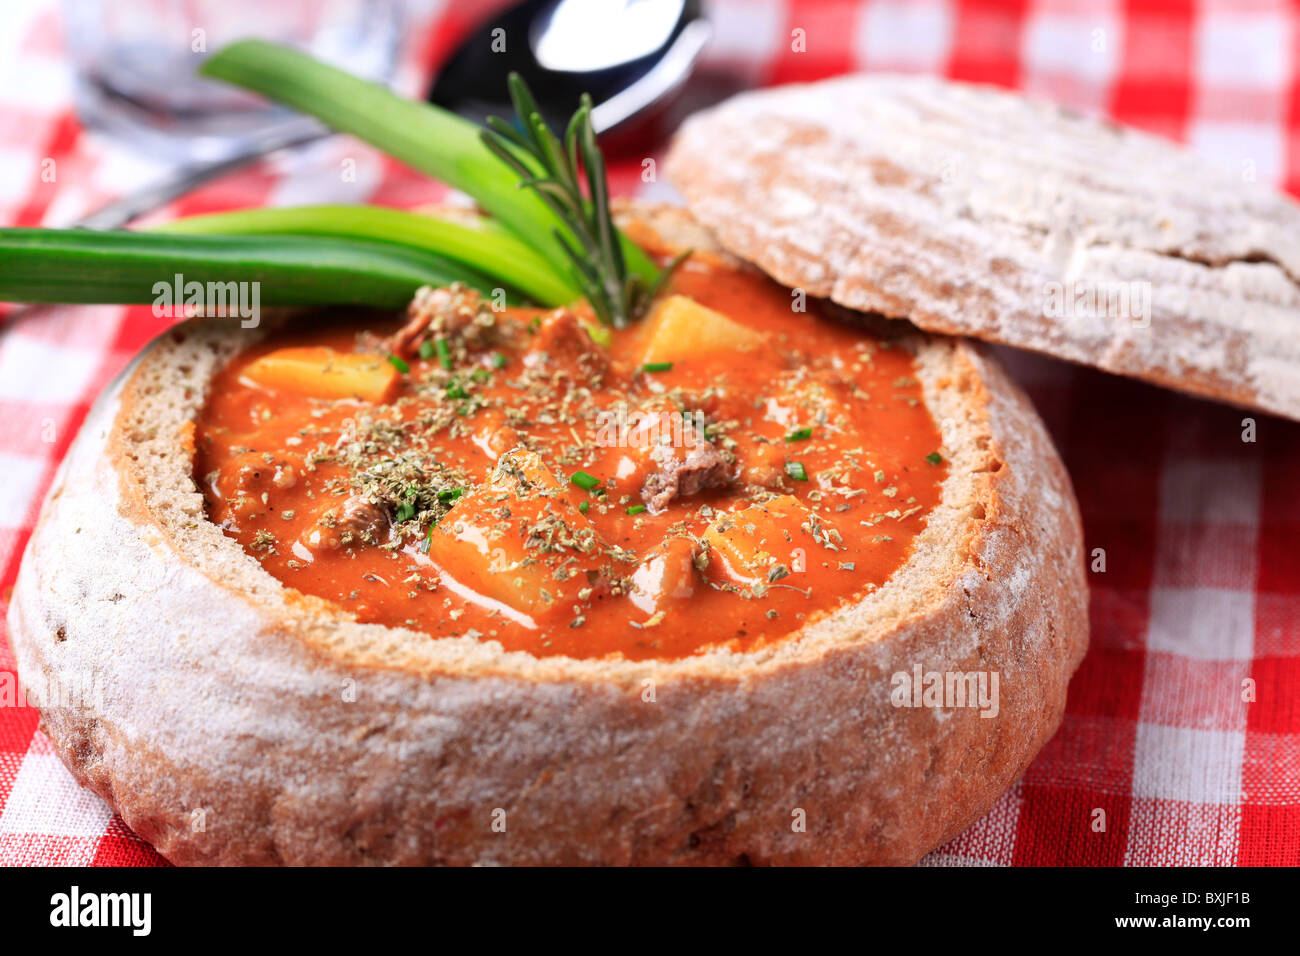 Goulash in a bread bowl Stock Photo